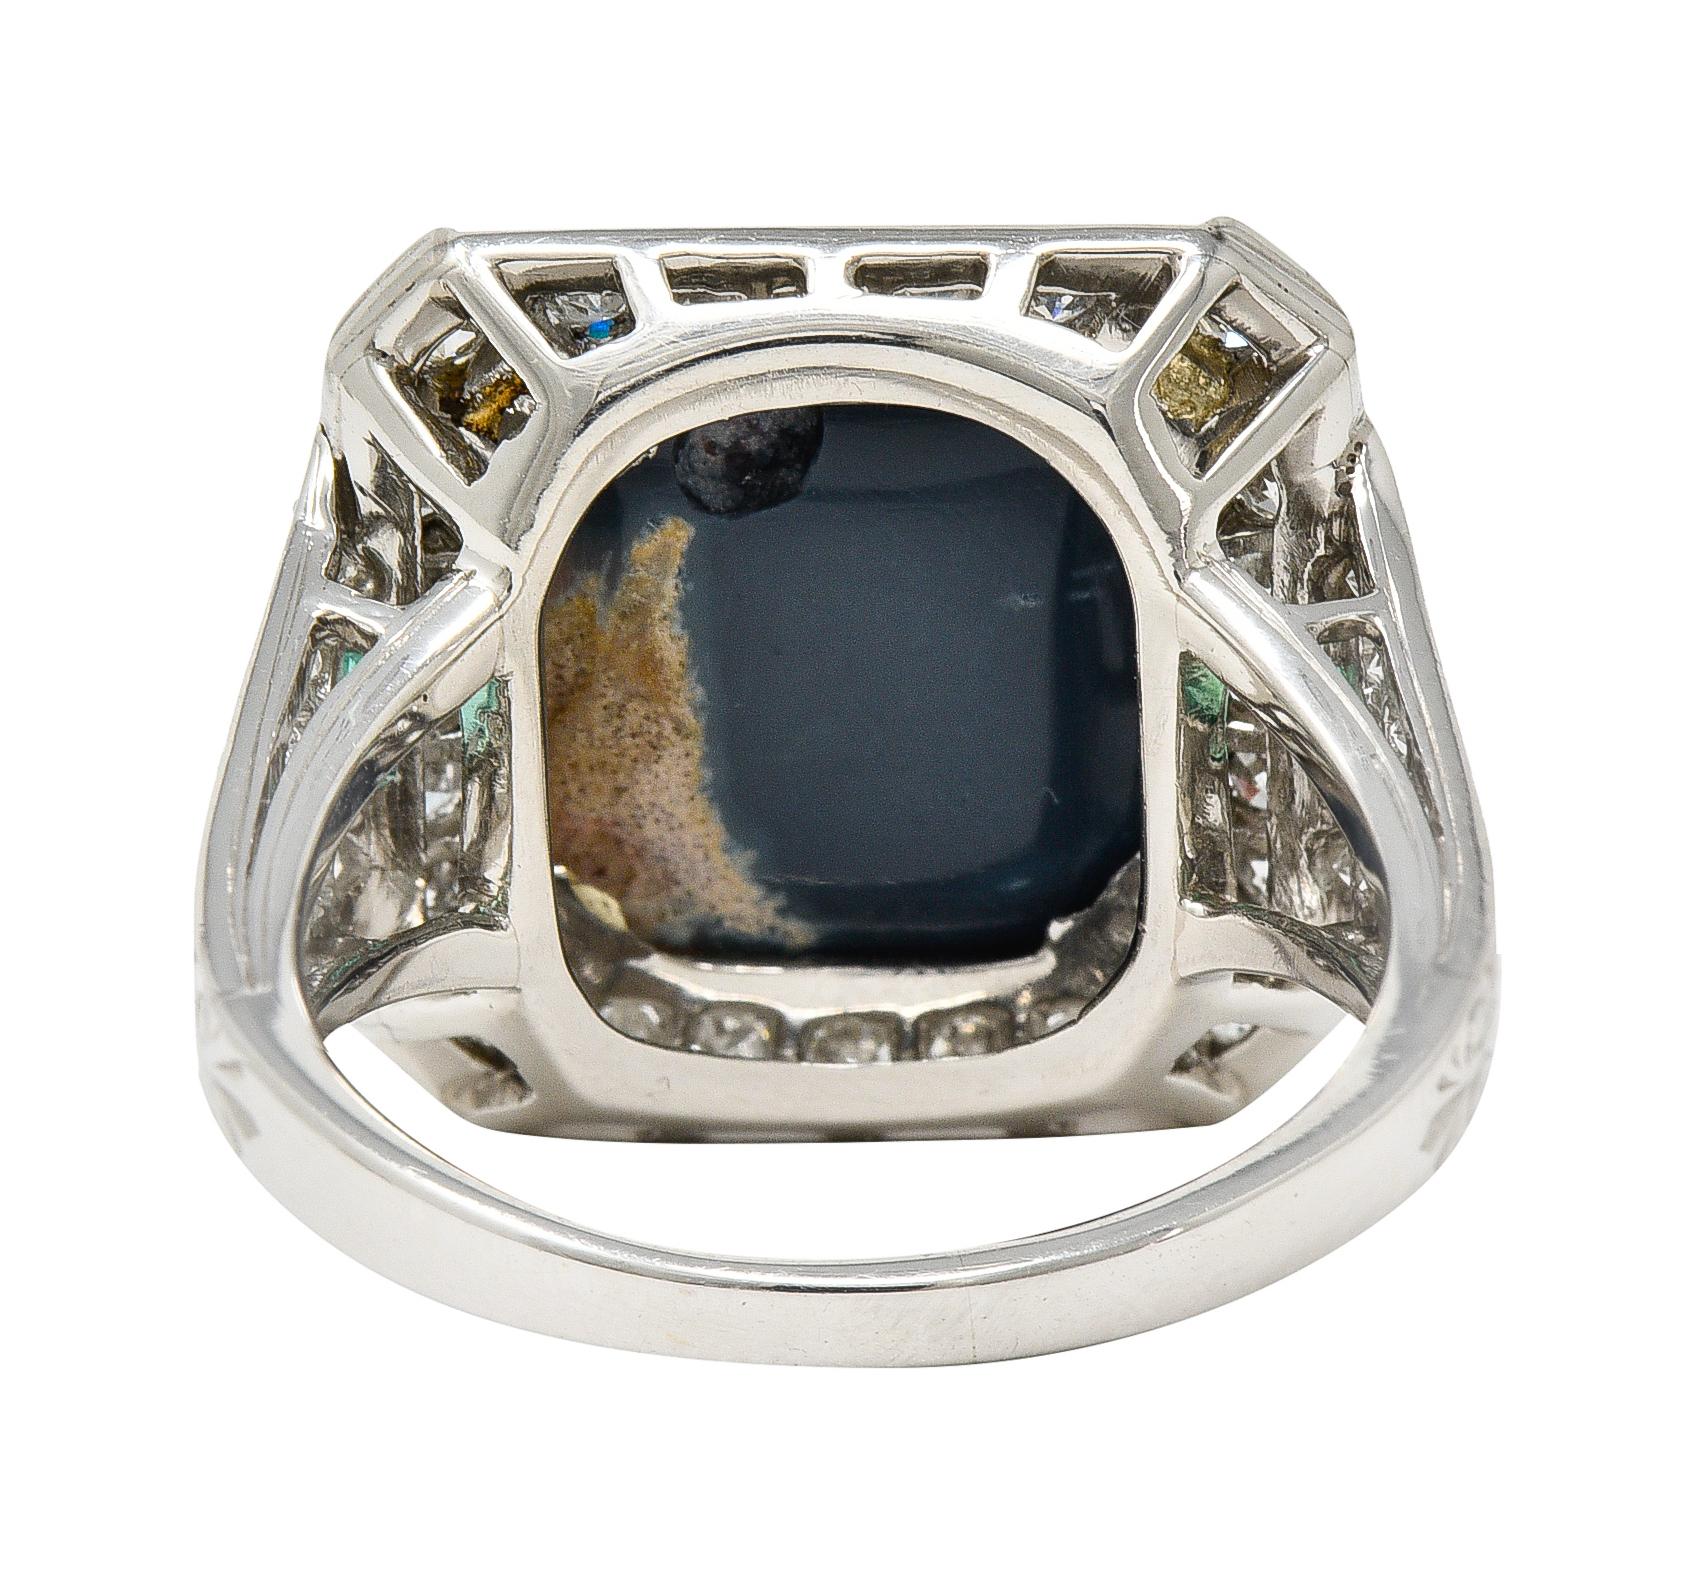 Marcus & Co. Art Deco Octagonal Black Opal Emerald Diamond Platinum Halo Ring In Excellent Condition For Sale In Philadelphia, PA